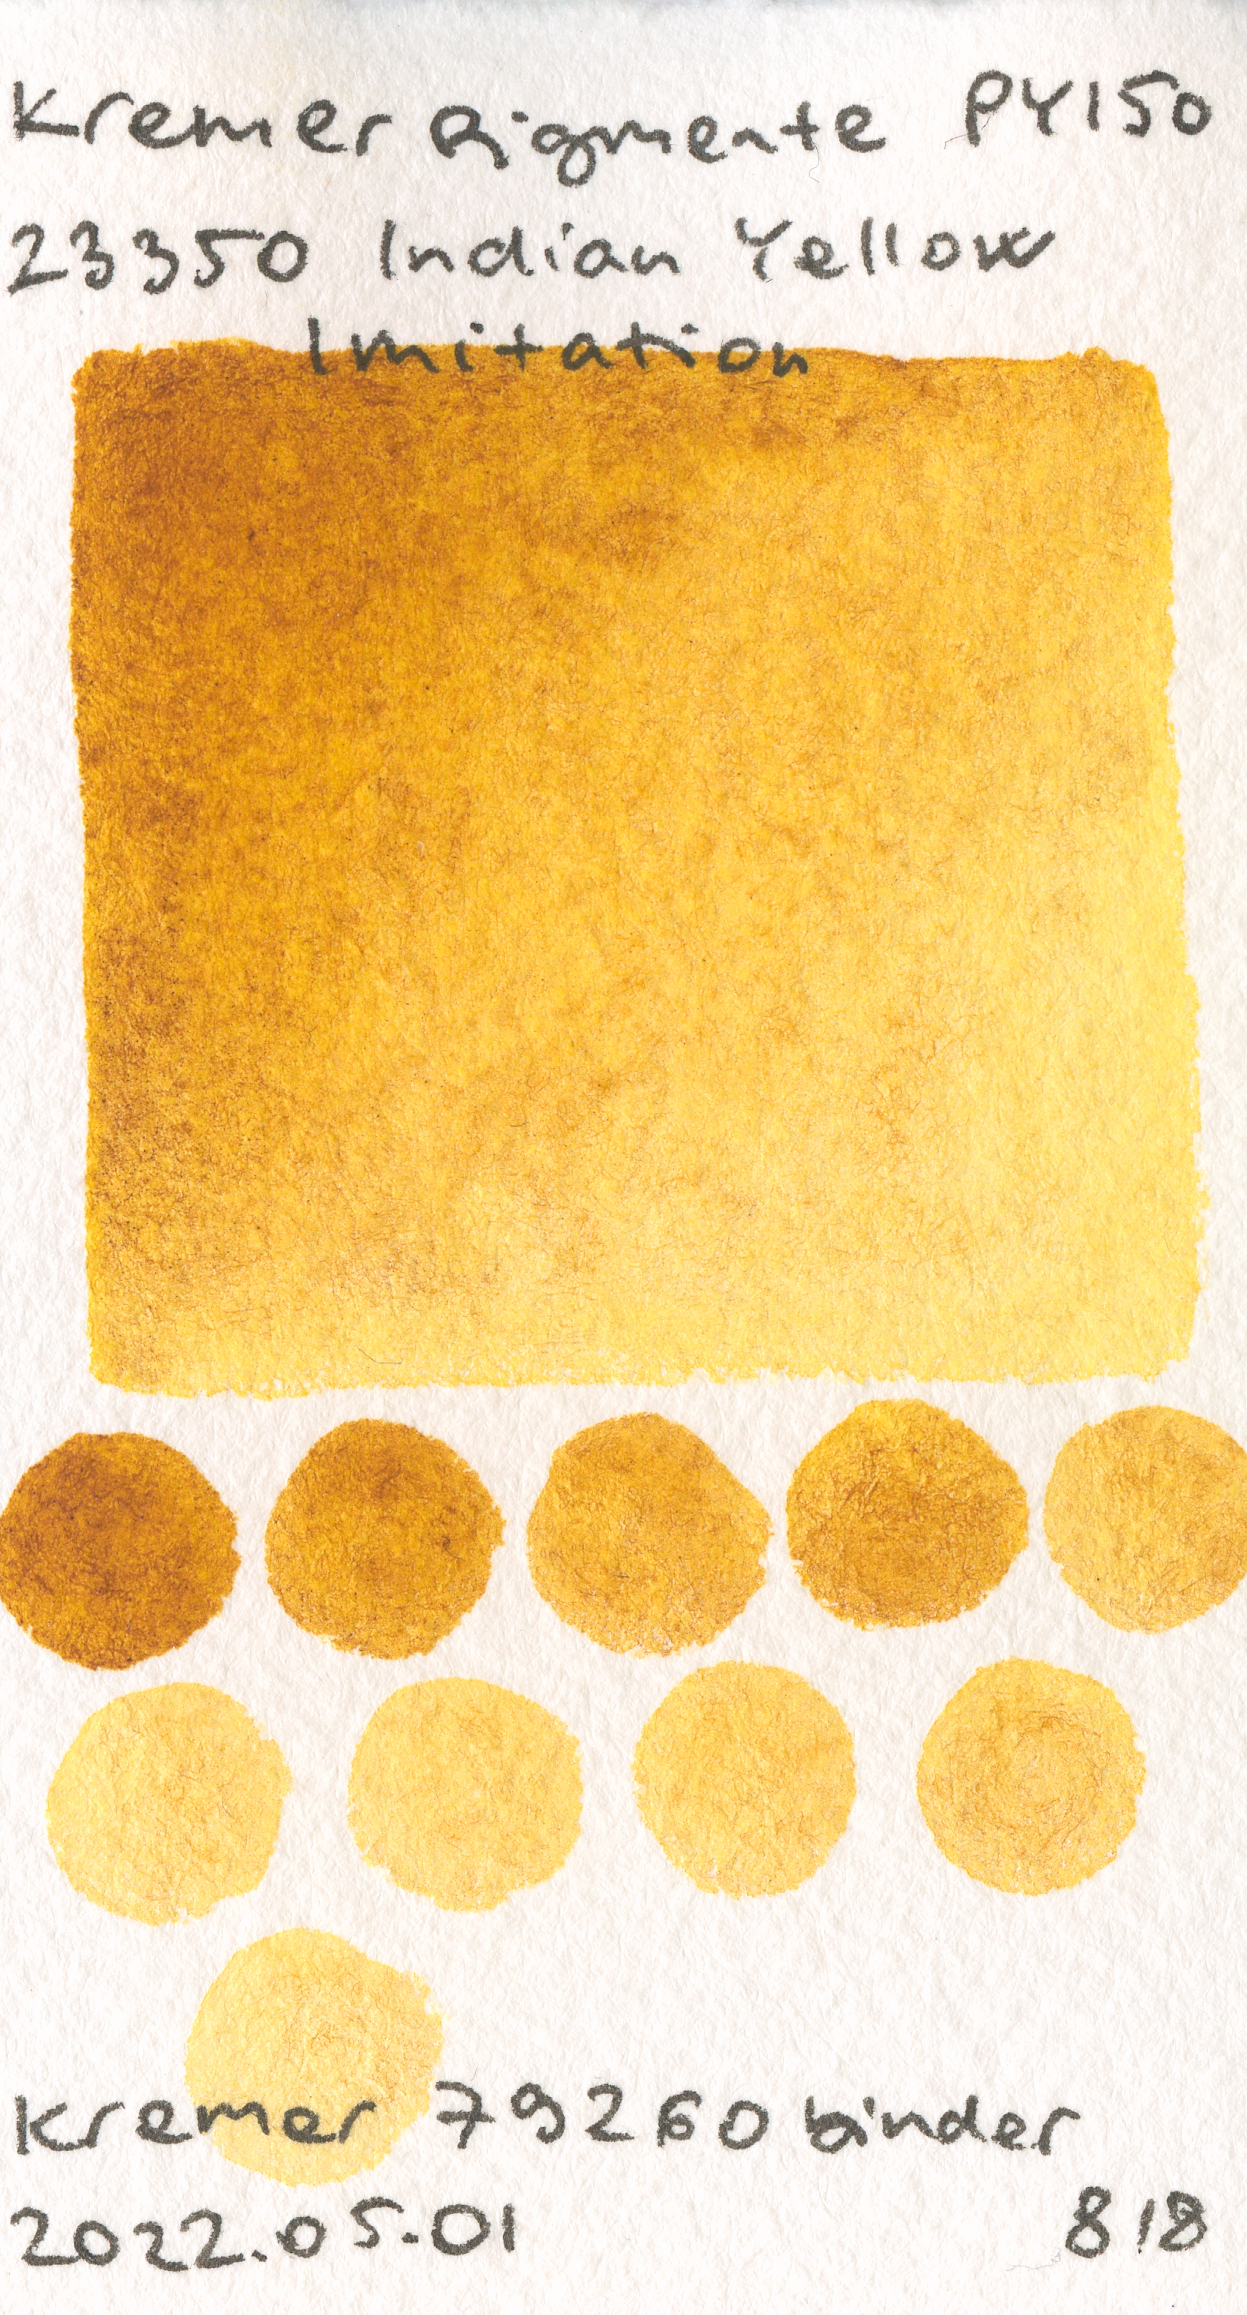 Kremer Pigmente [Dry] Pigments 23350 Indian Yellow Imitation PY150 watercolor swatch